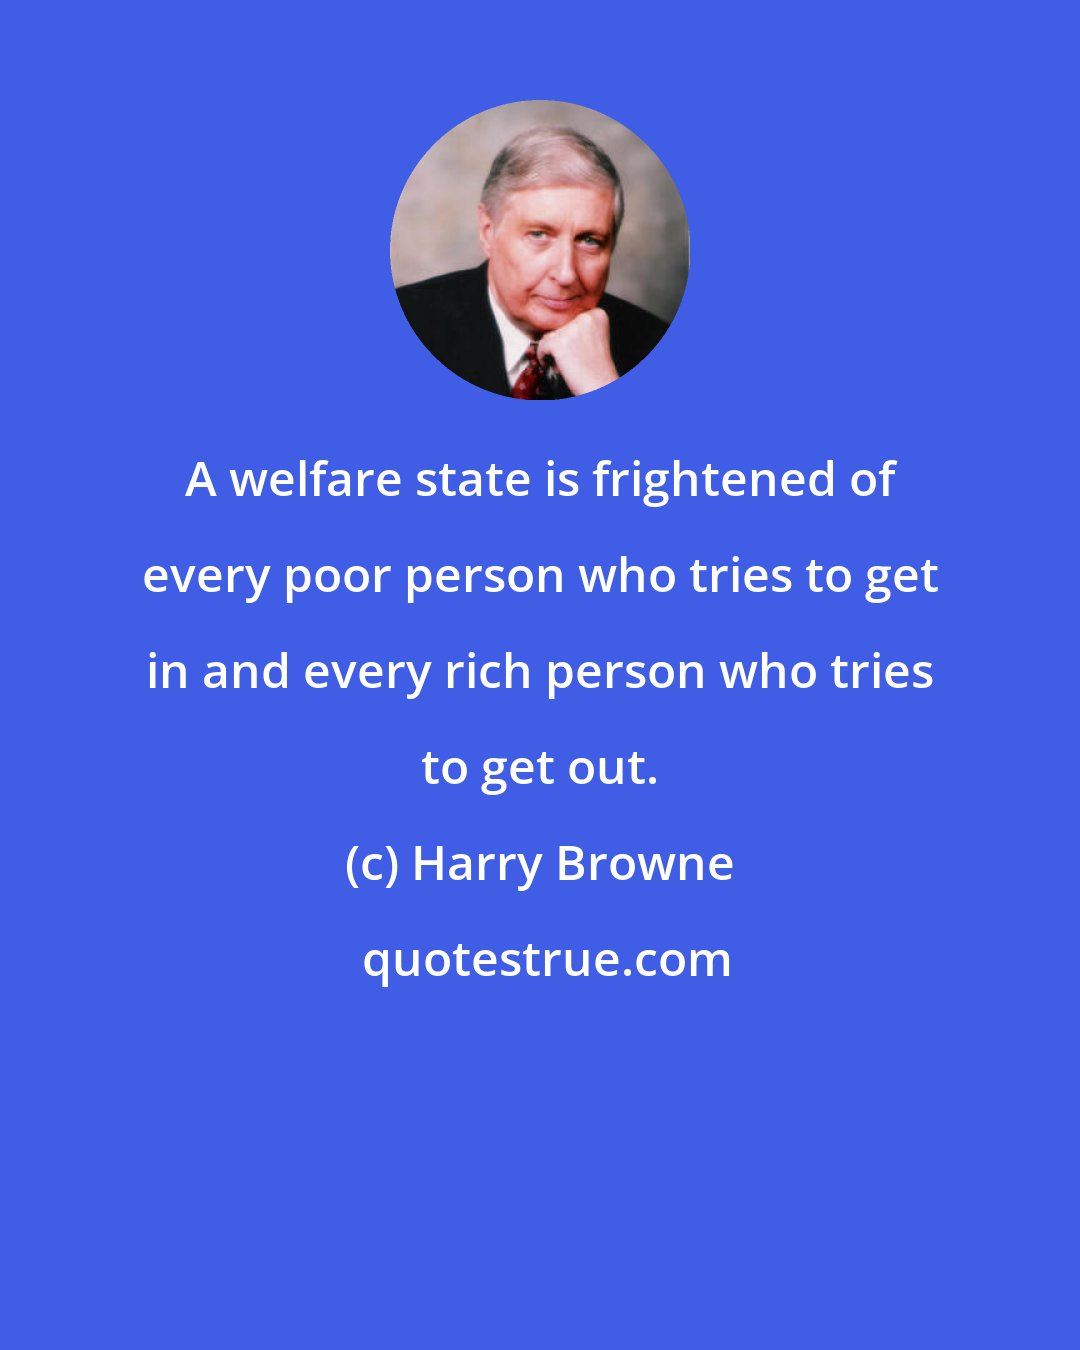 Harry Browne: A welfare state is frightened of every poor person who tries to get in and every rich person who tries to get out.